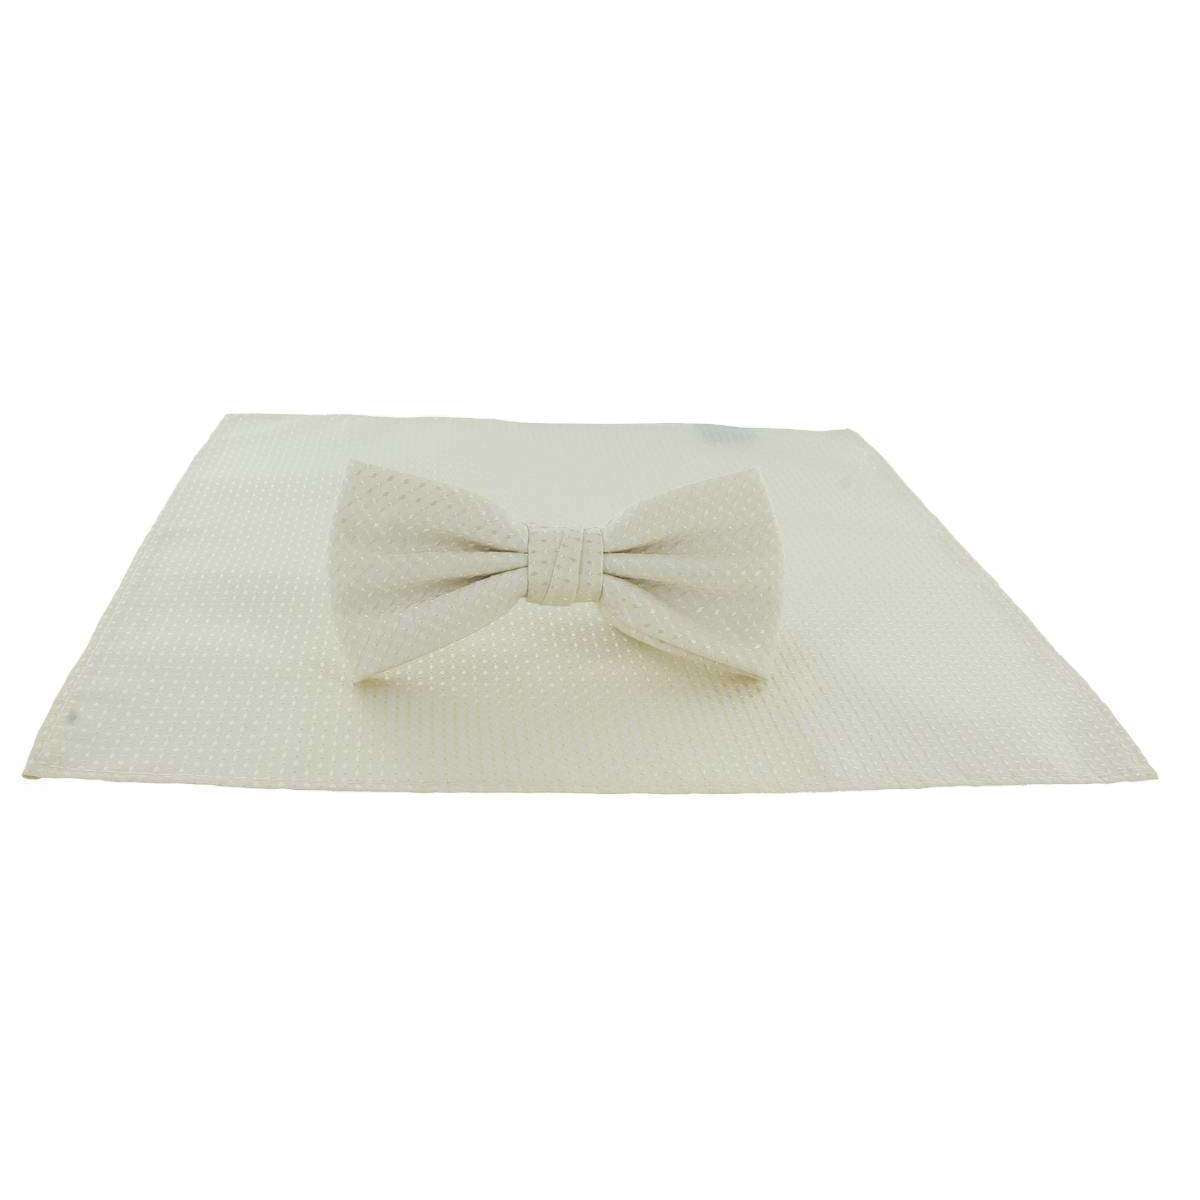 Michelsons of London Semi Plain Bow Tie and Pocket Square Set - Cream